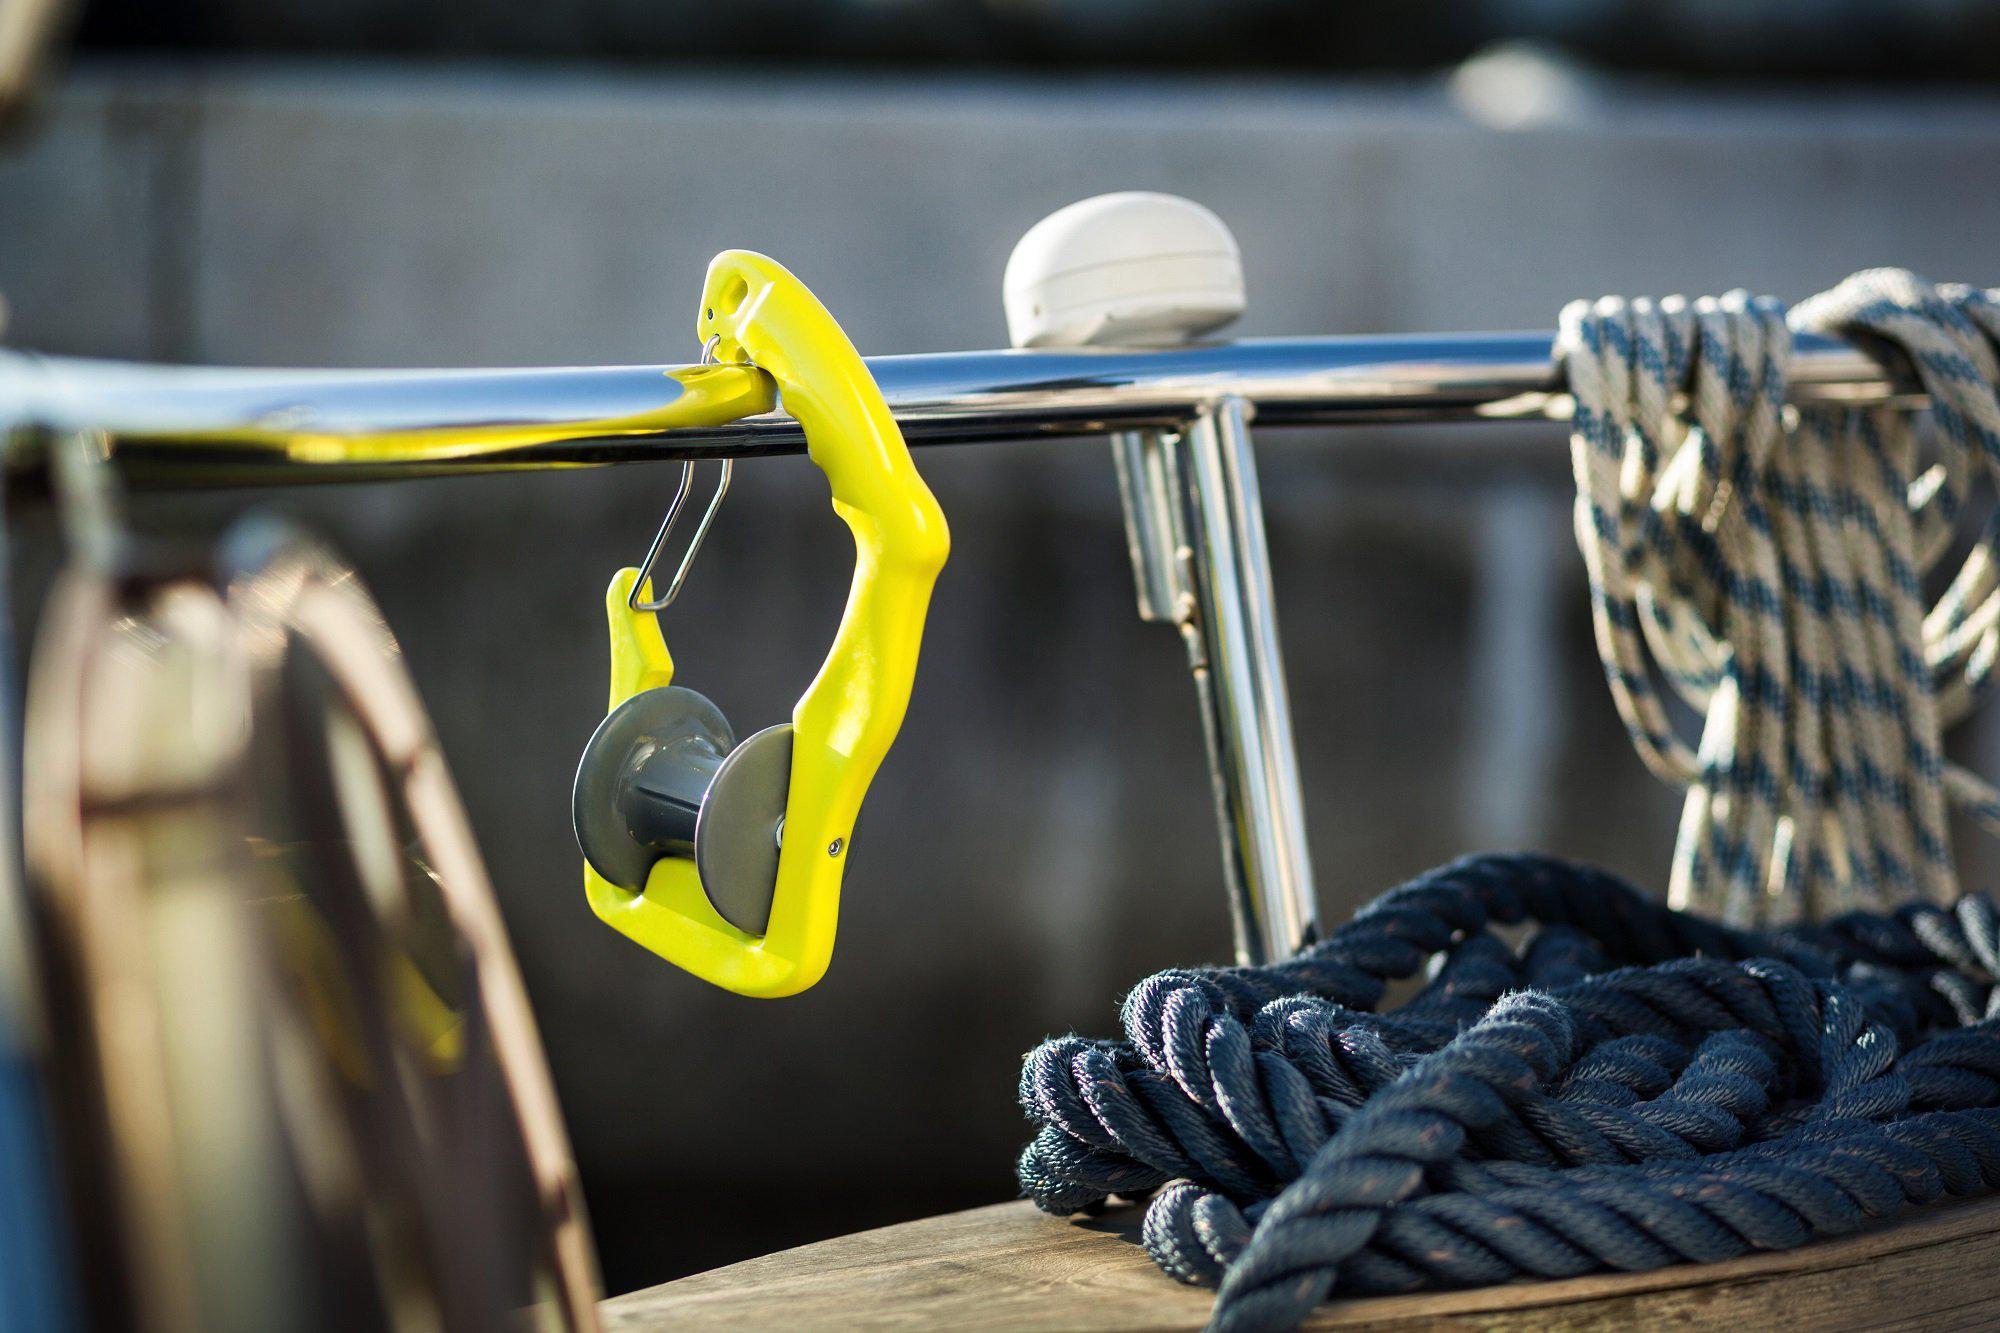 GHOOK European Made Rotating Mooring Hook for Clean and Fast Mooring Line Transfer-Canadian Marine &amp; Outdoor Equipment